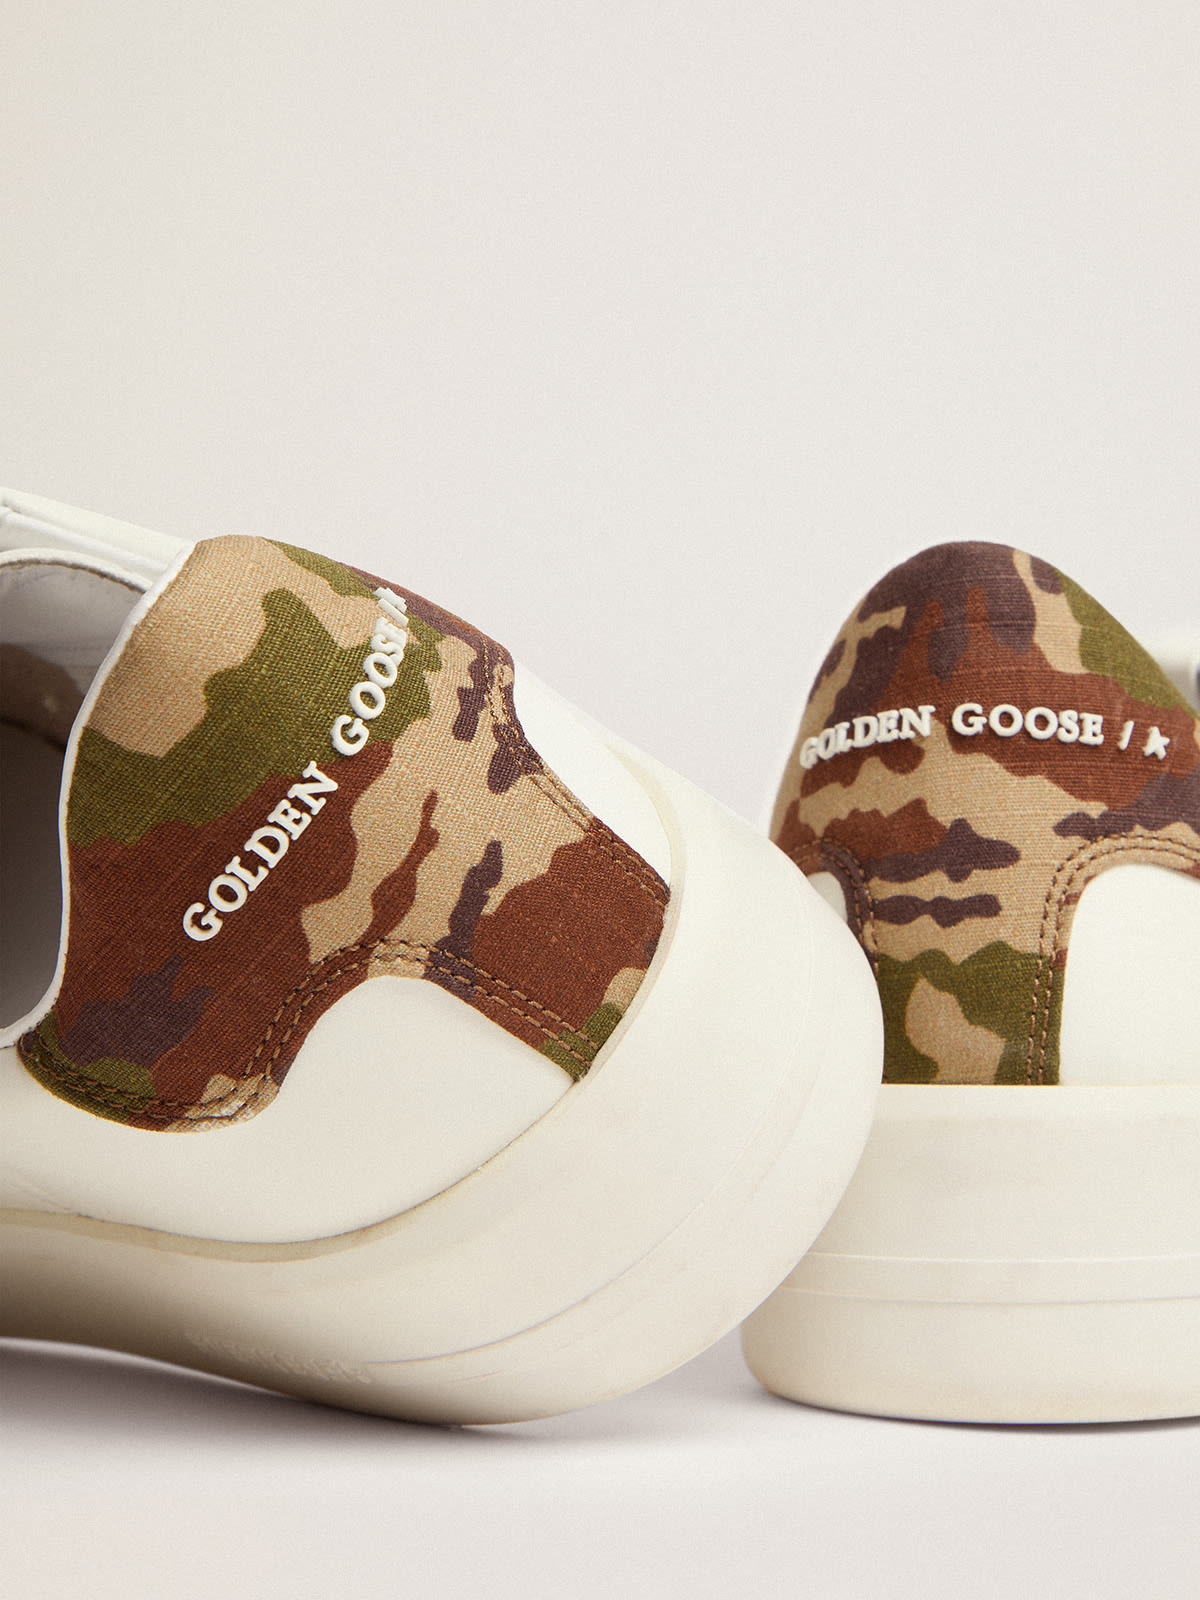 Golden Goose - Purestar sneakers in white leather with tone-on-tone star and green heel tab in camouflage-print ripstop fabric in 